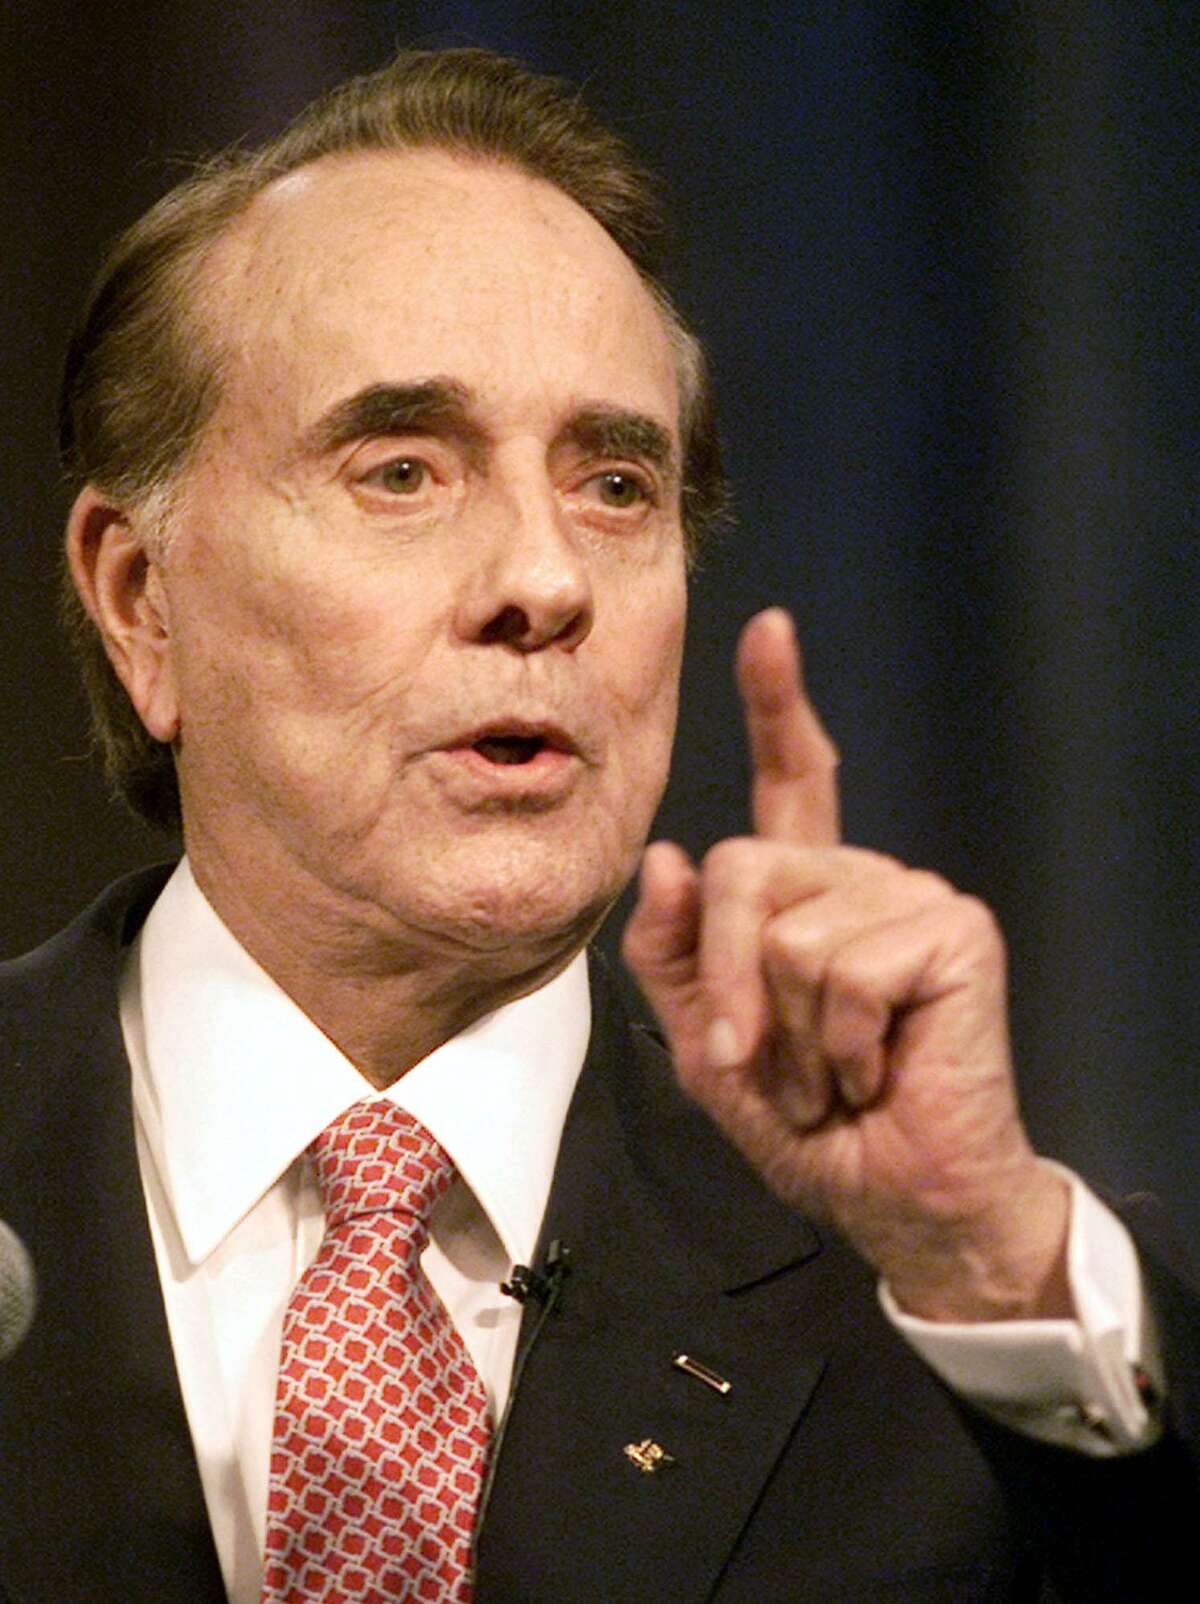 Wouldn’t it wonderful if our legislators, both national and state, would take a lesson from the life Bob Dole lived?